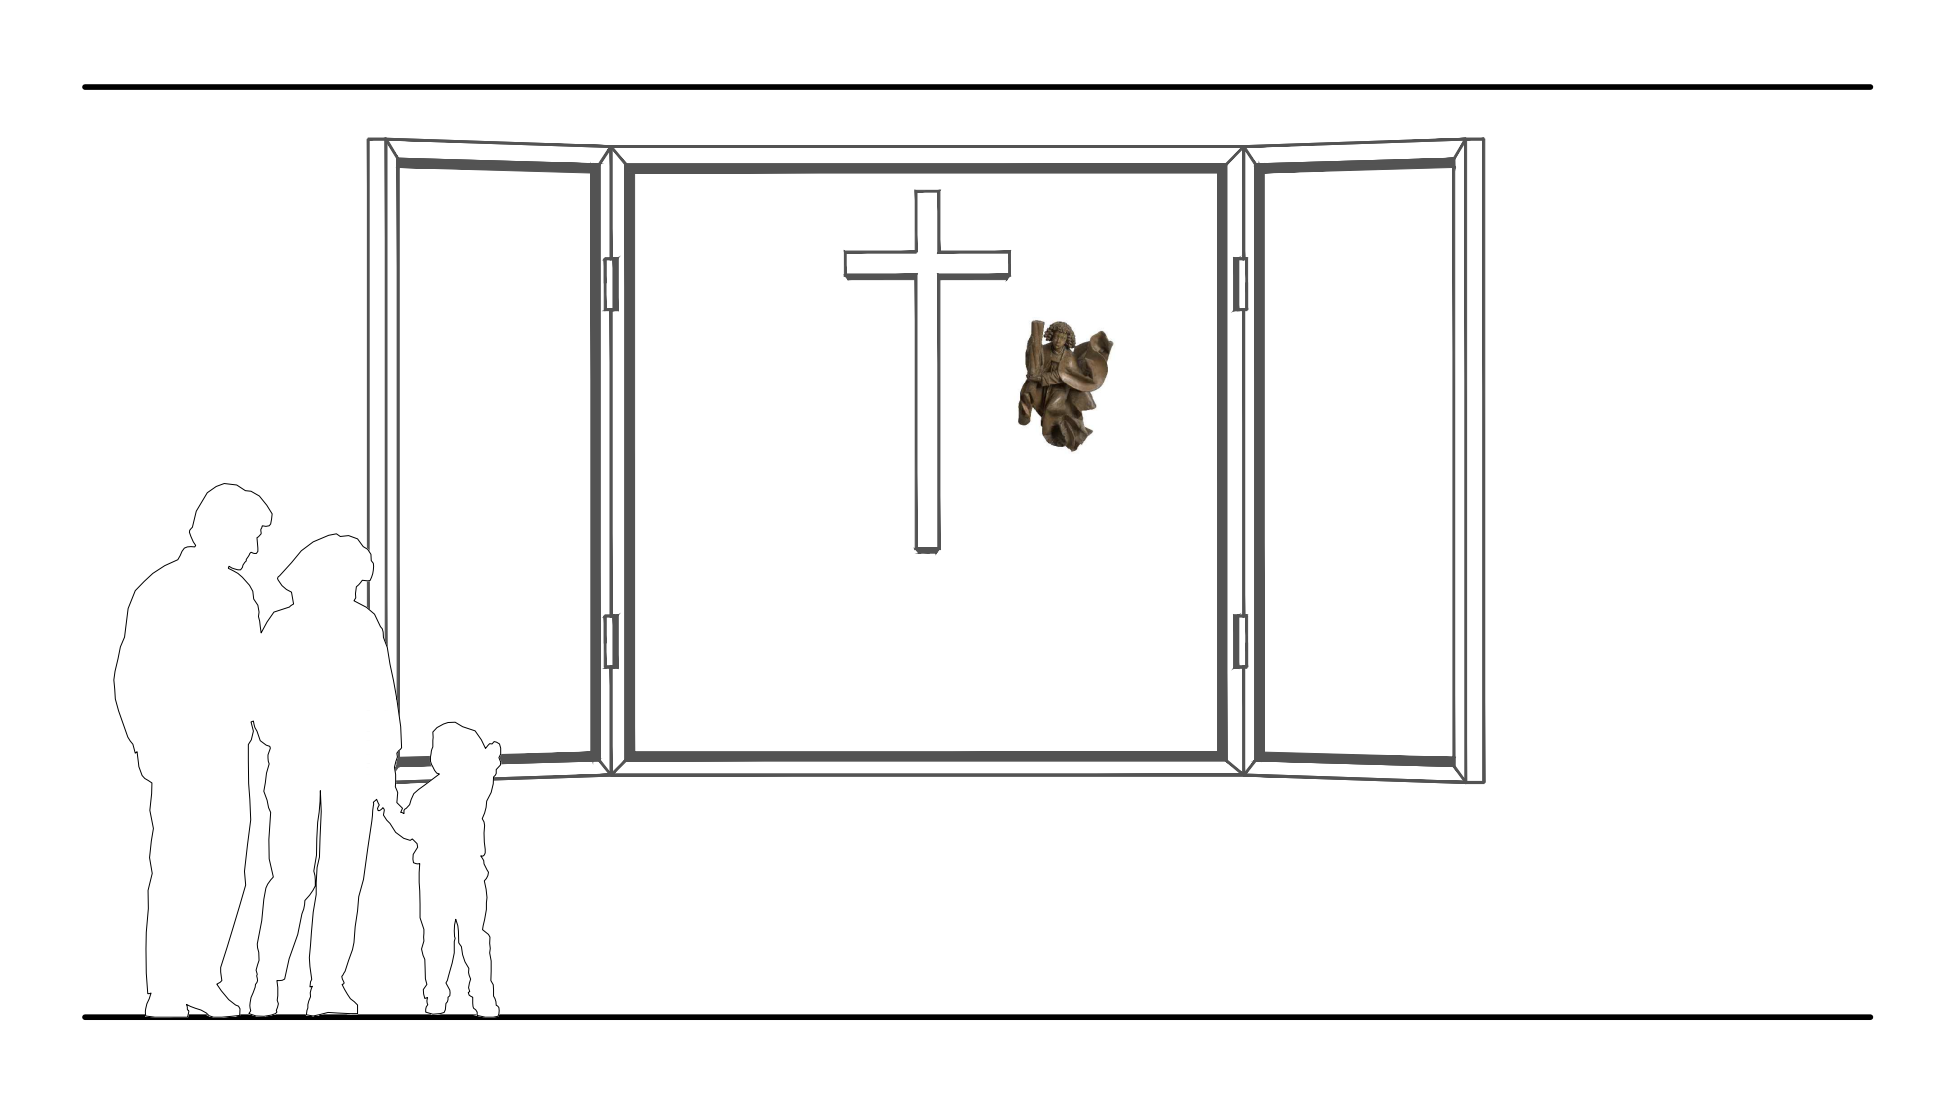 scaled schematic graphic of an altarpiece based on surviving examples